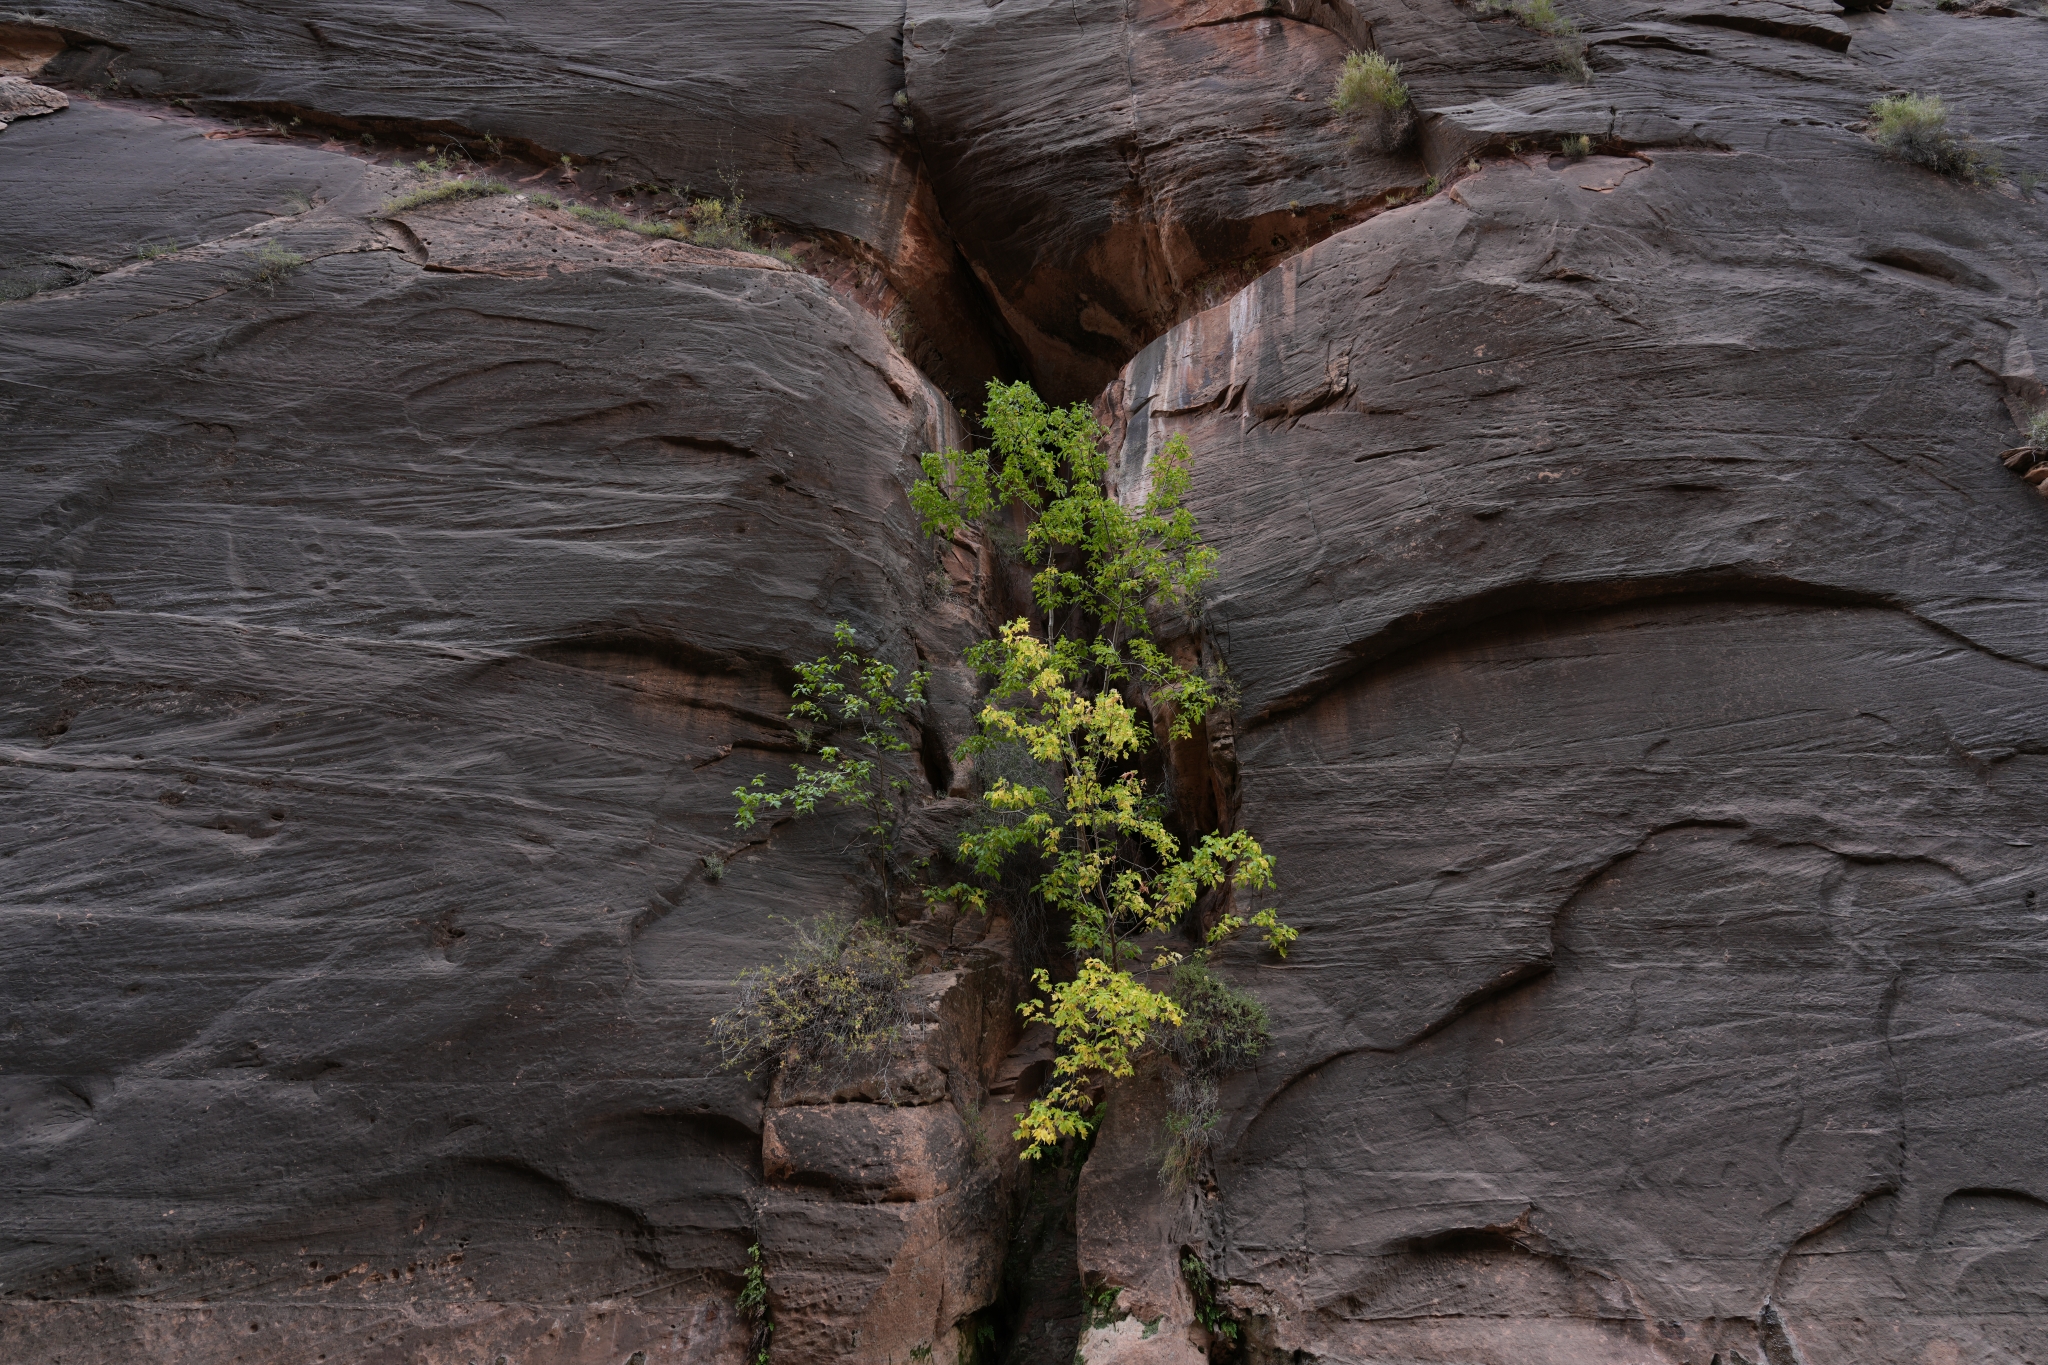 Plants growing in a crack in a rock